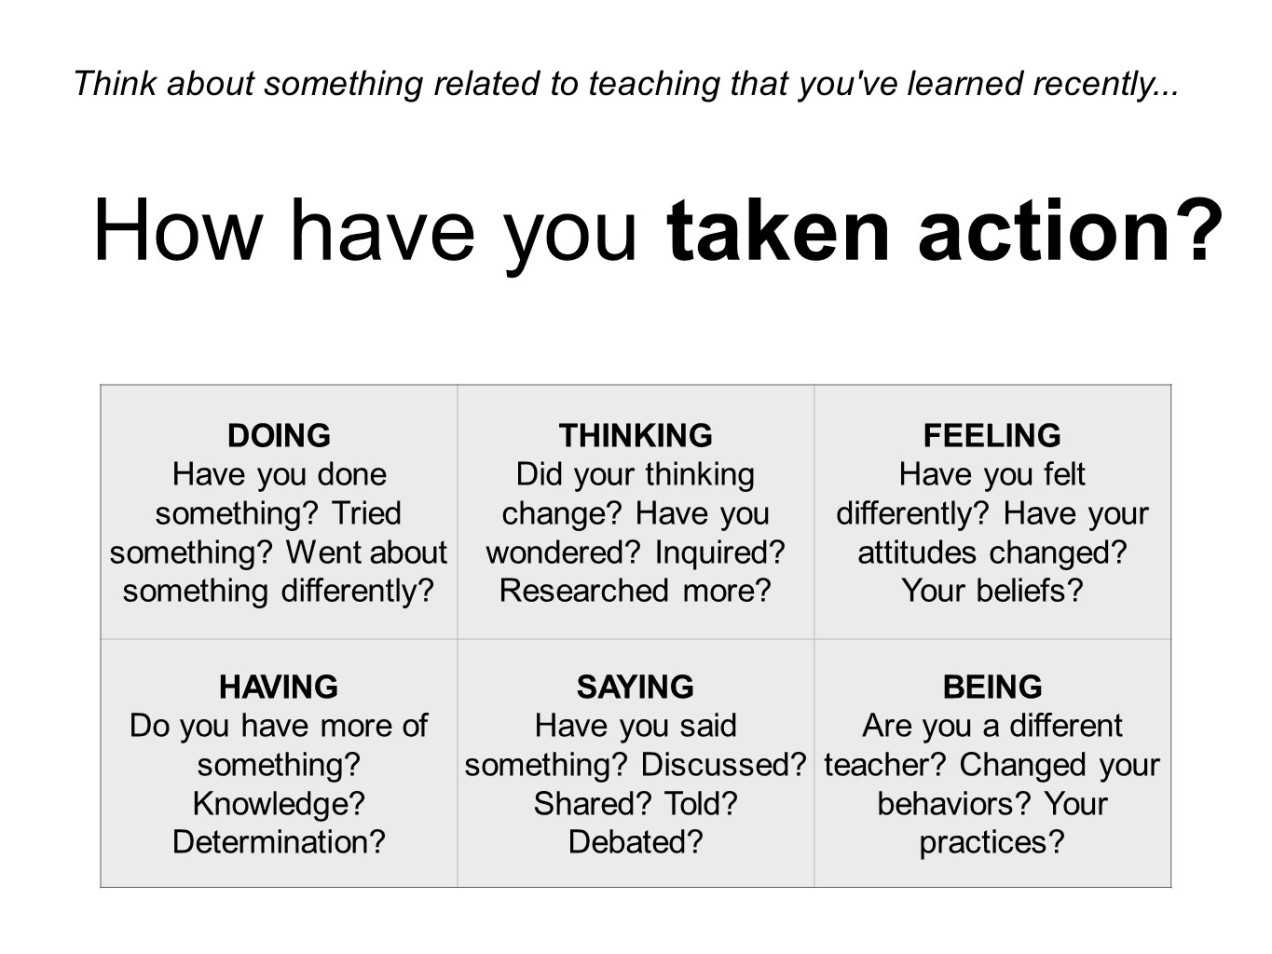 Inquiry based Learning. Inquiry перевод. Something different. Thinking and doing. Need something перевод